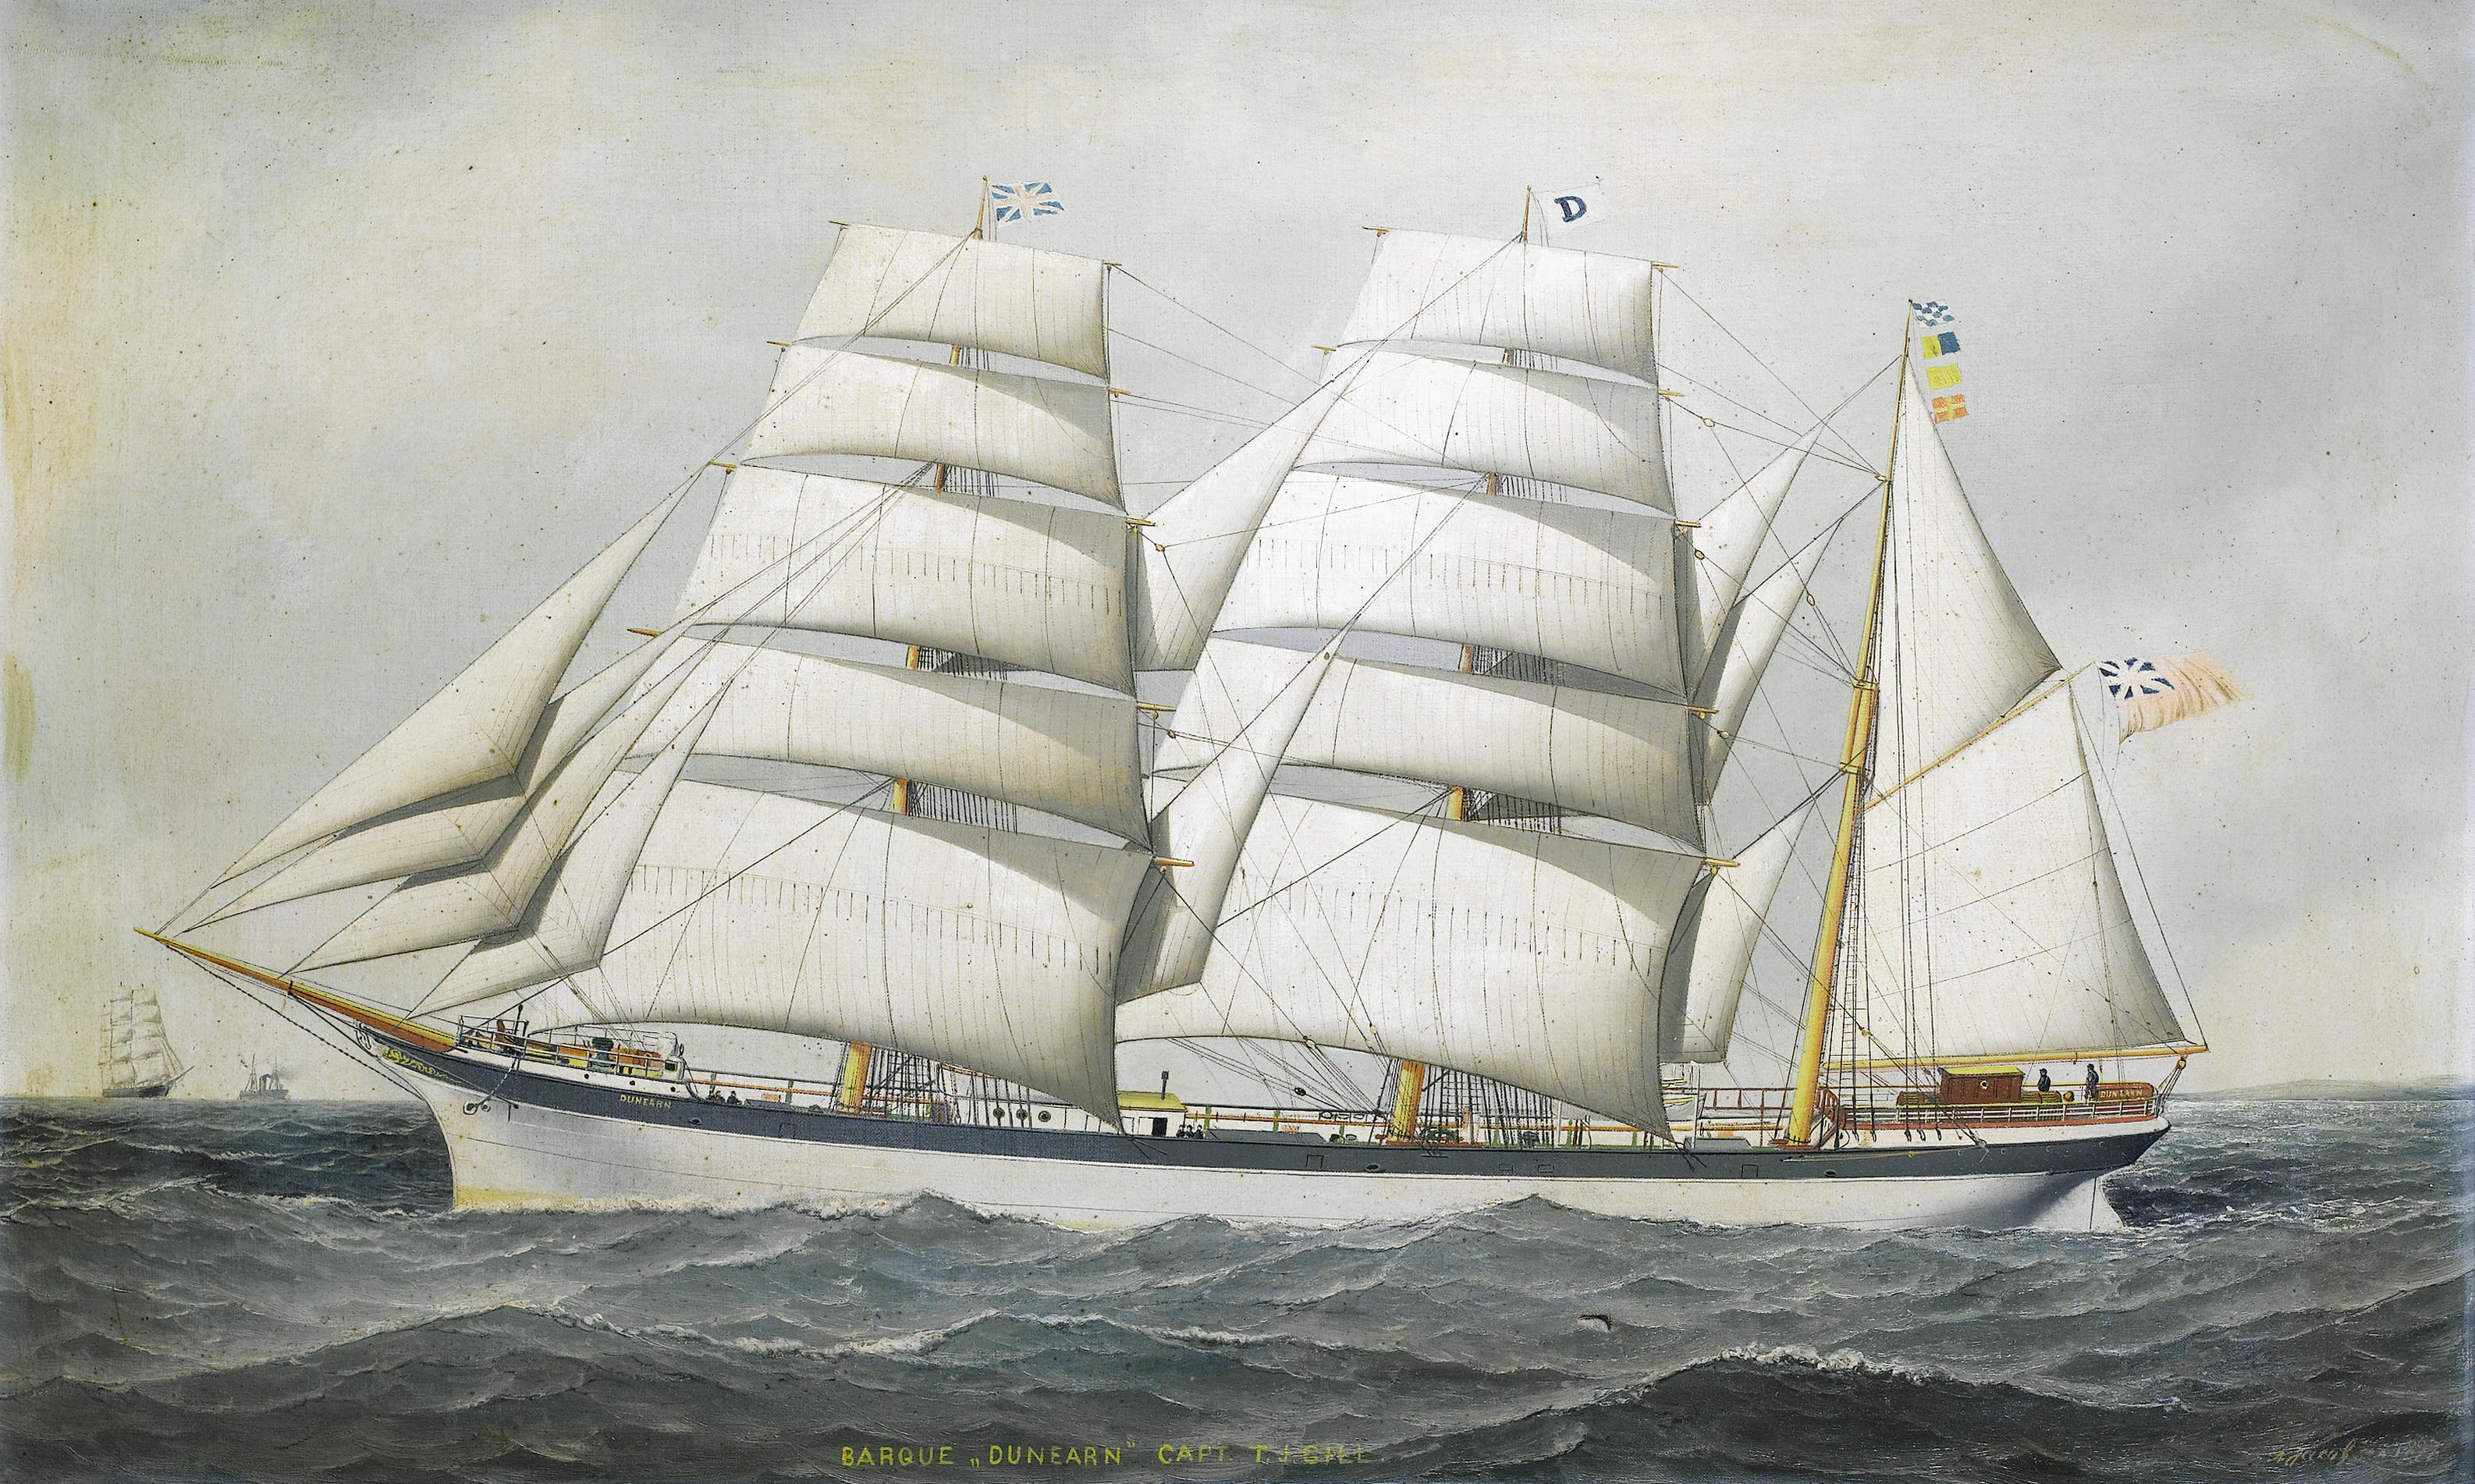 Antonio Jacobsen - The British barque Dunearn at sea under full sail and calling for a pilot